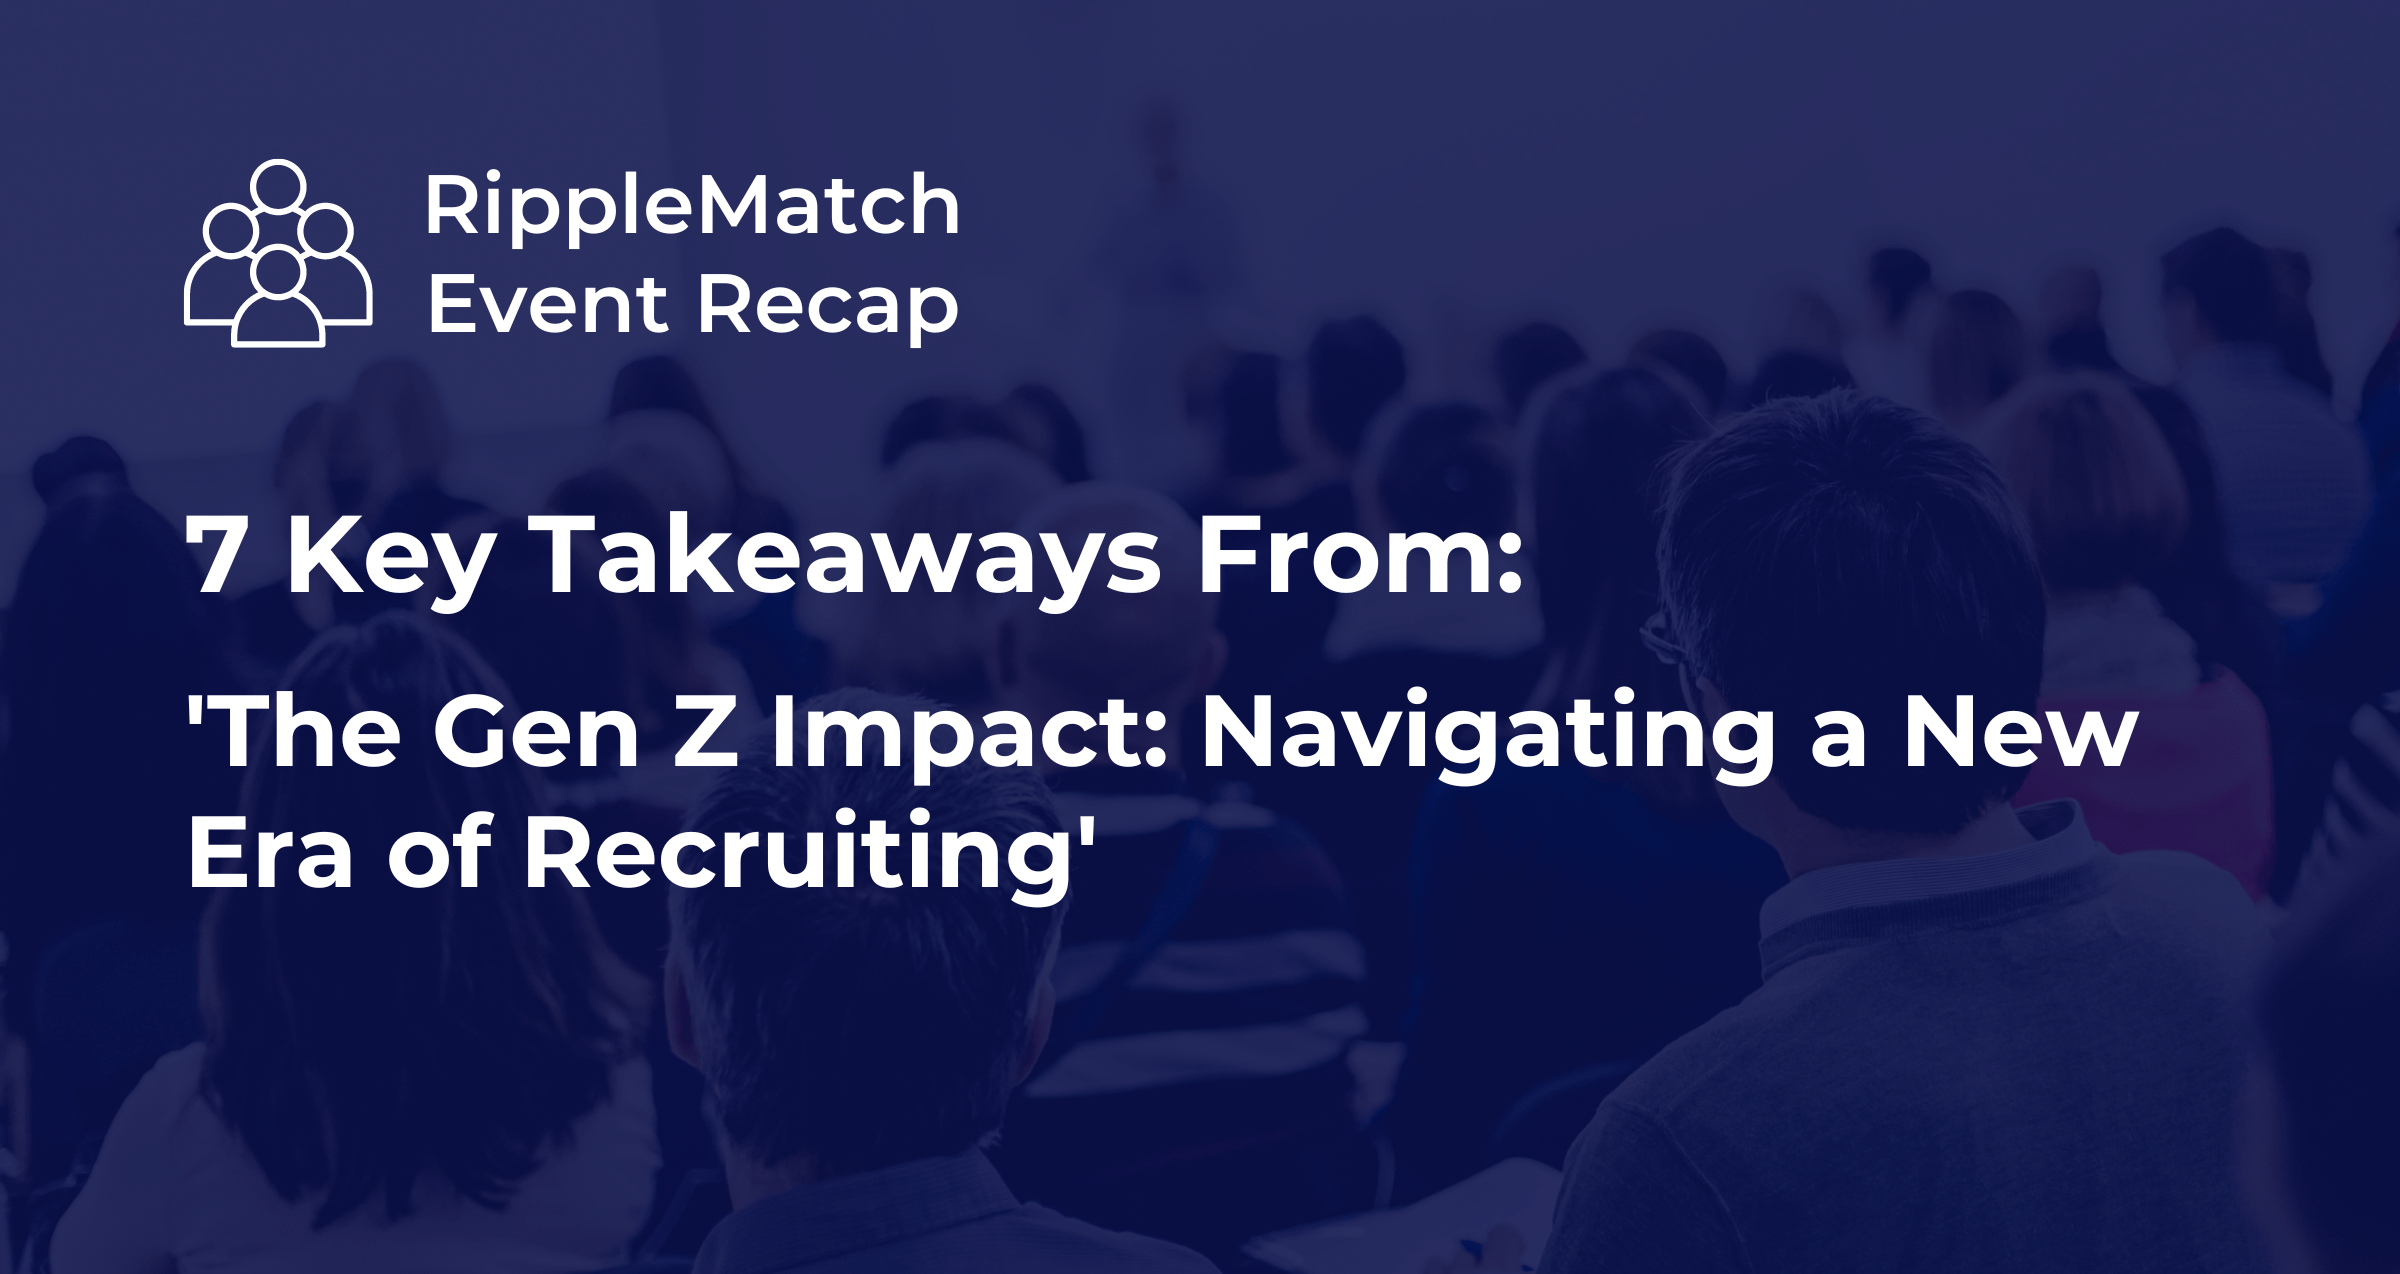 7 Key Takeaways From ‘The Gen Z Impact: Navigating a New Era of Recruiting’